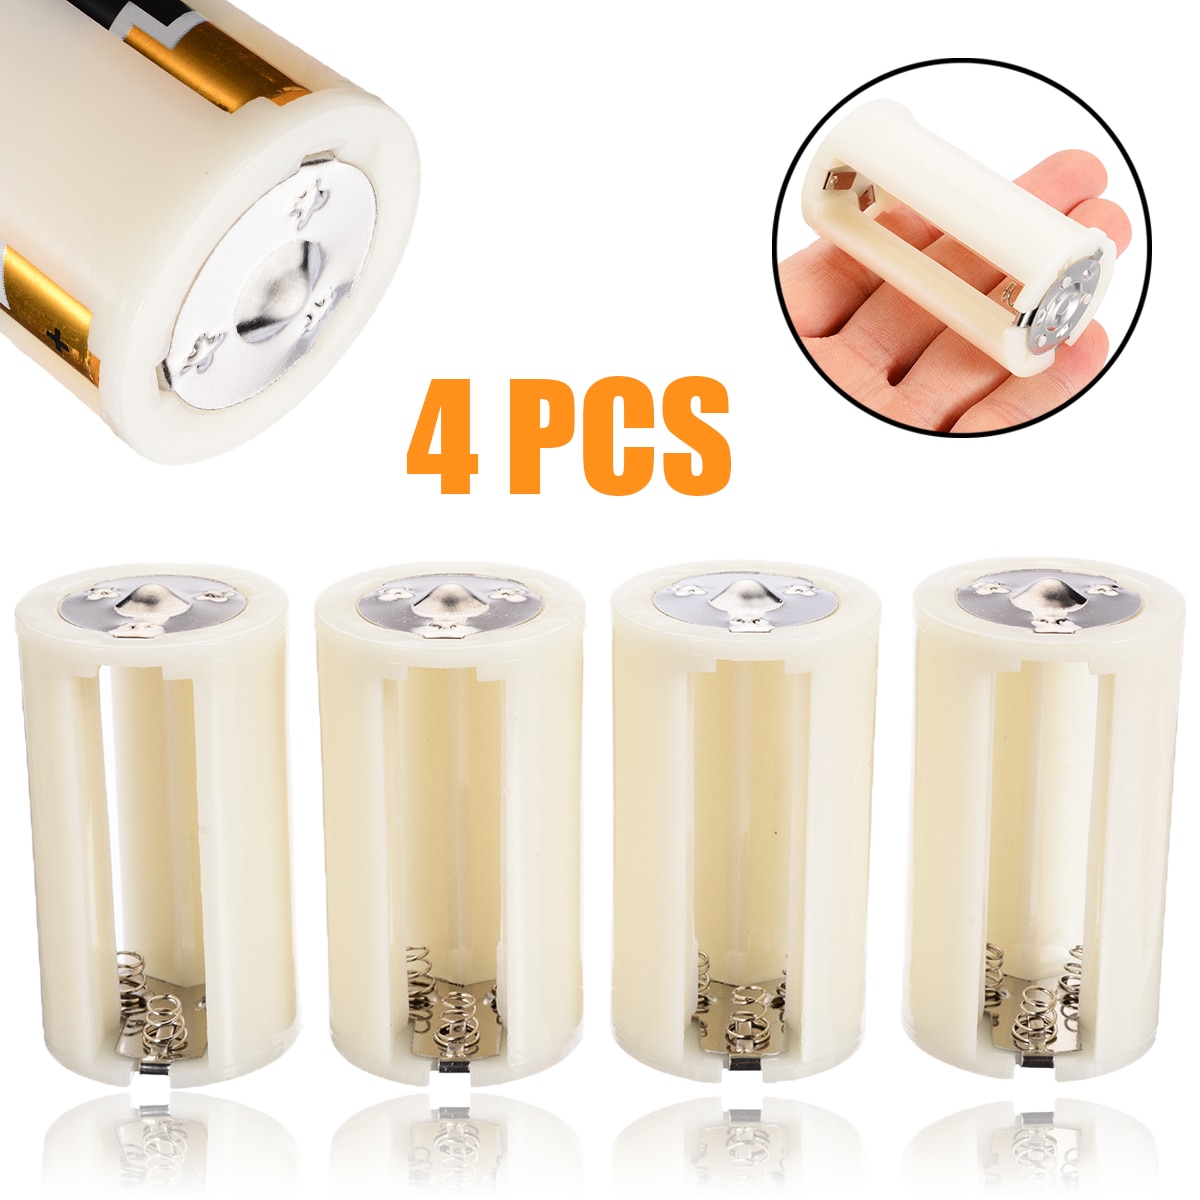 4pcs AA To D Battery Box 3x AA To D Size Battery Adapter Converter Holder Switcher Case Box For Battery Storage